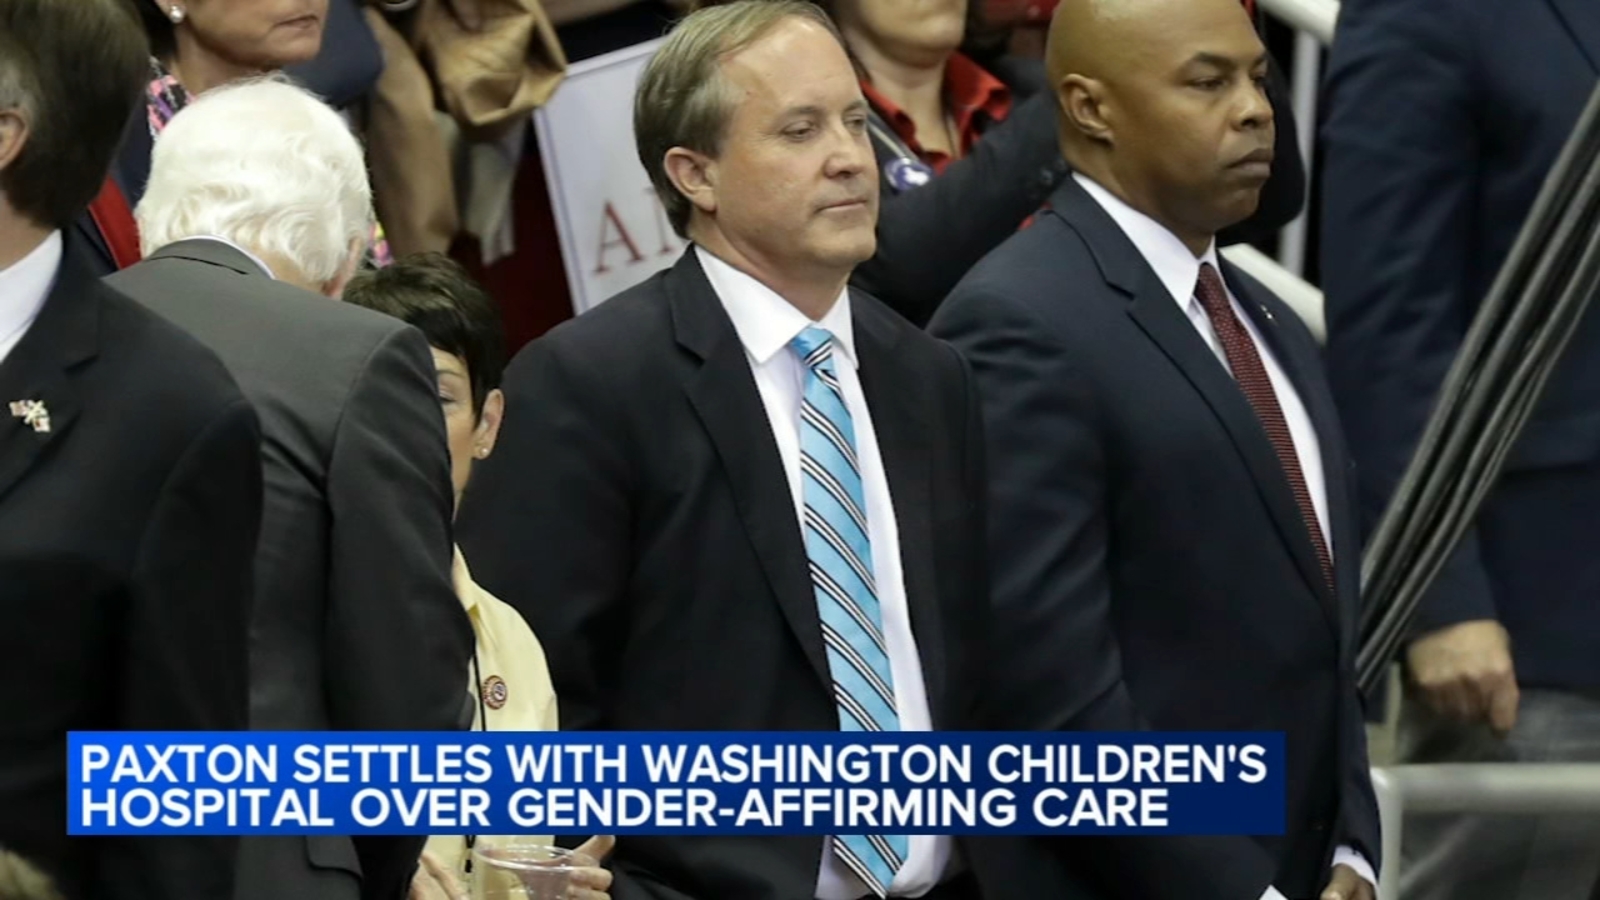 Ken Paxton trans care settlement: Texas attorney general and Seattle Children’s Hospital reach deal involving transgender patients [Video]